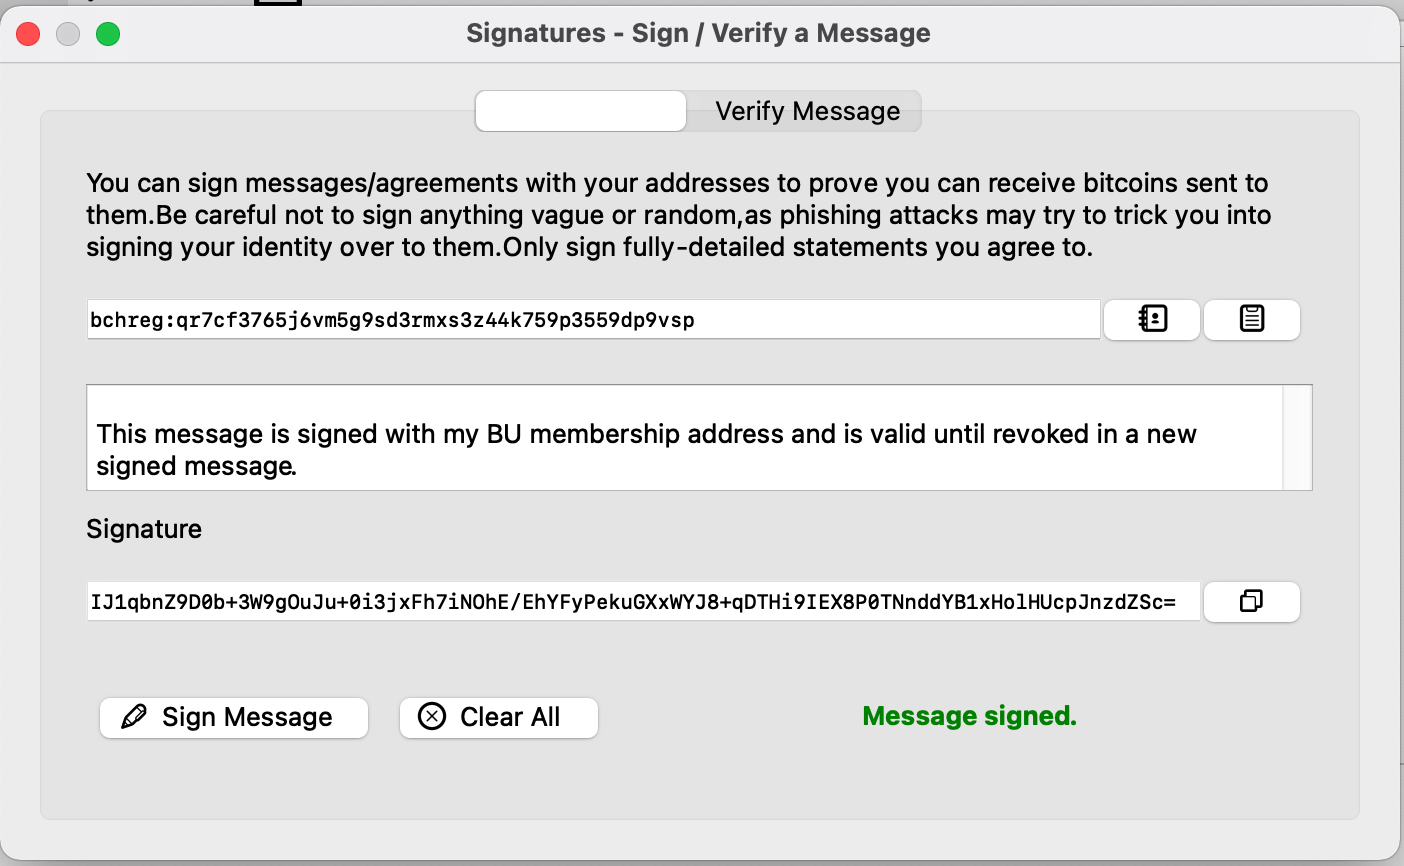 Sign a message